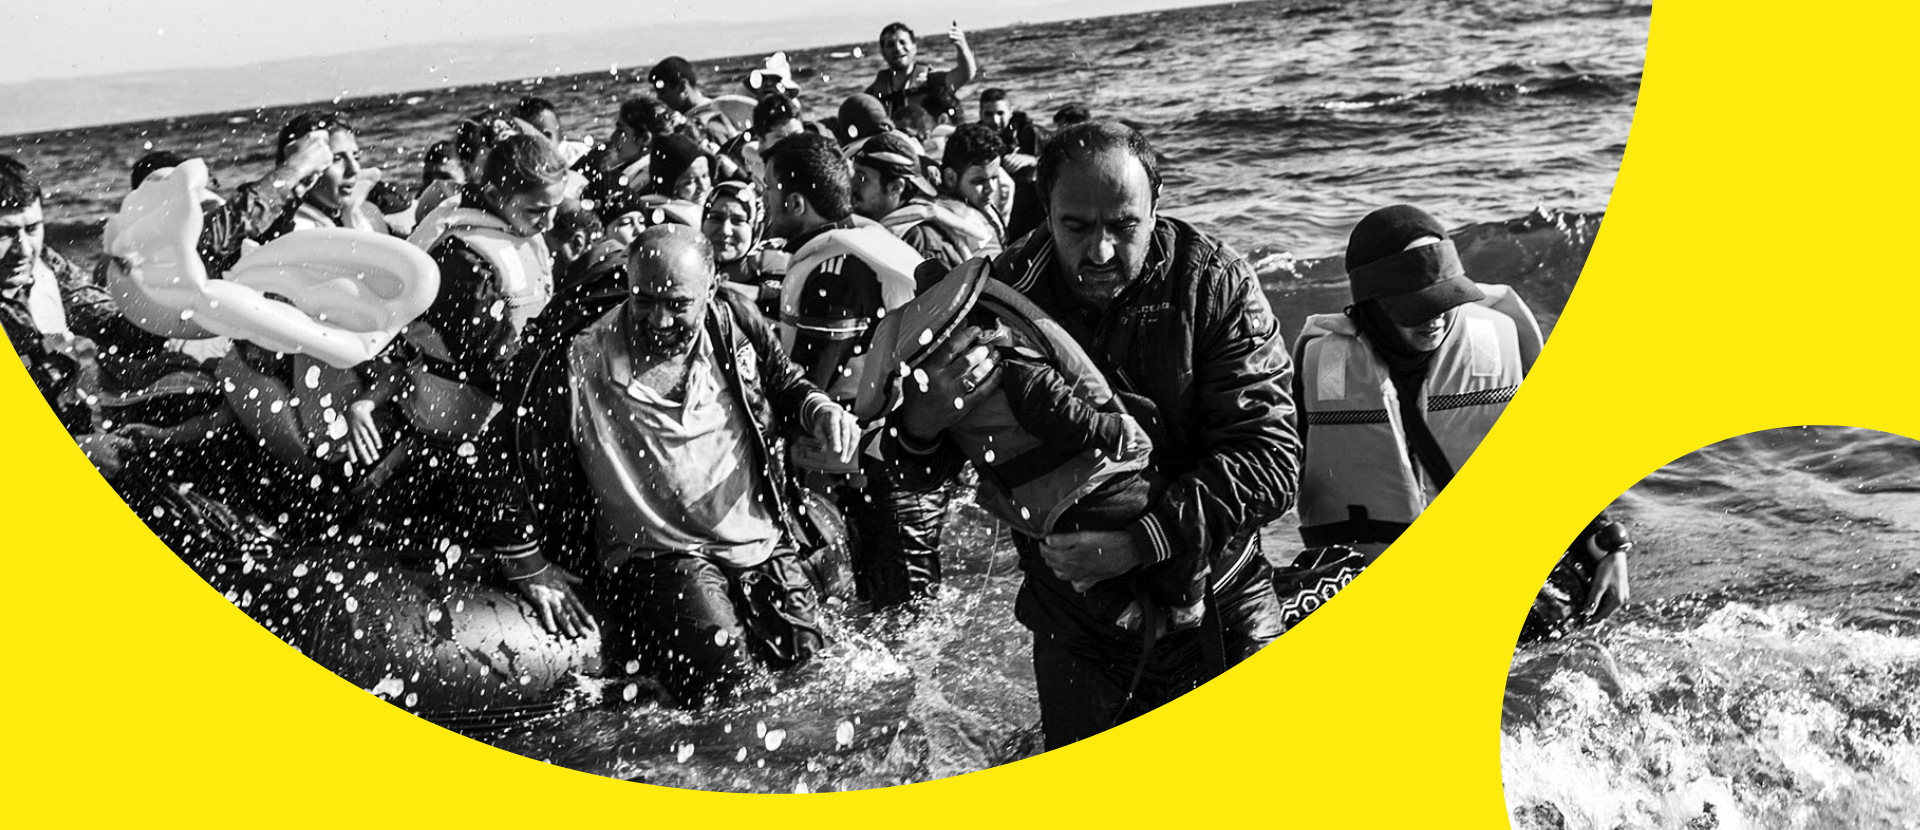 refugees yellow_1920x83014